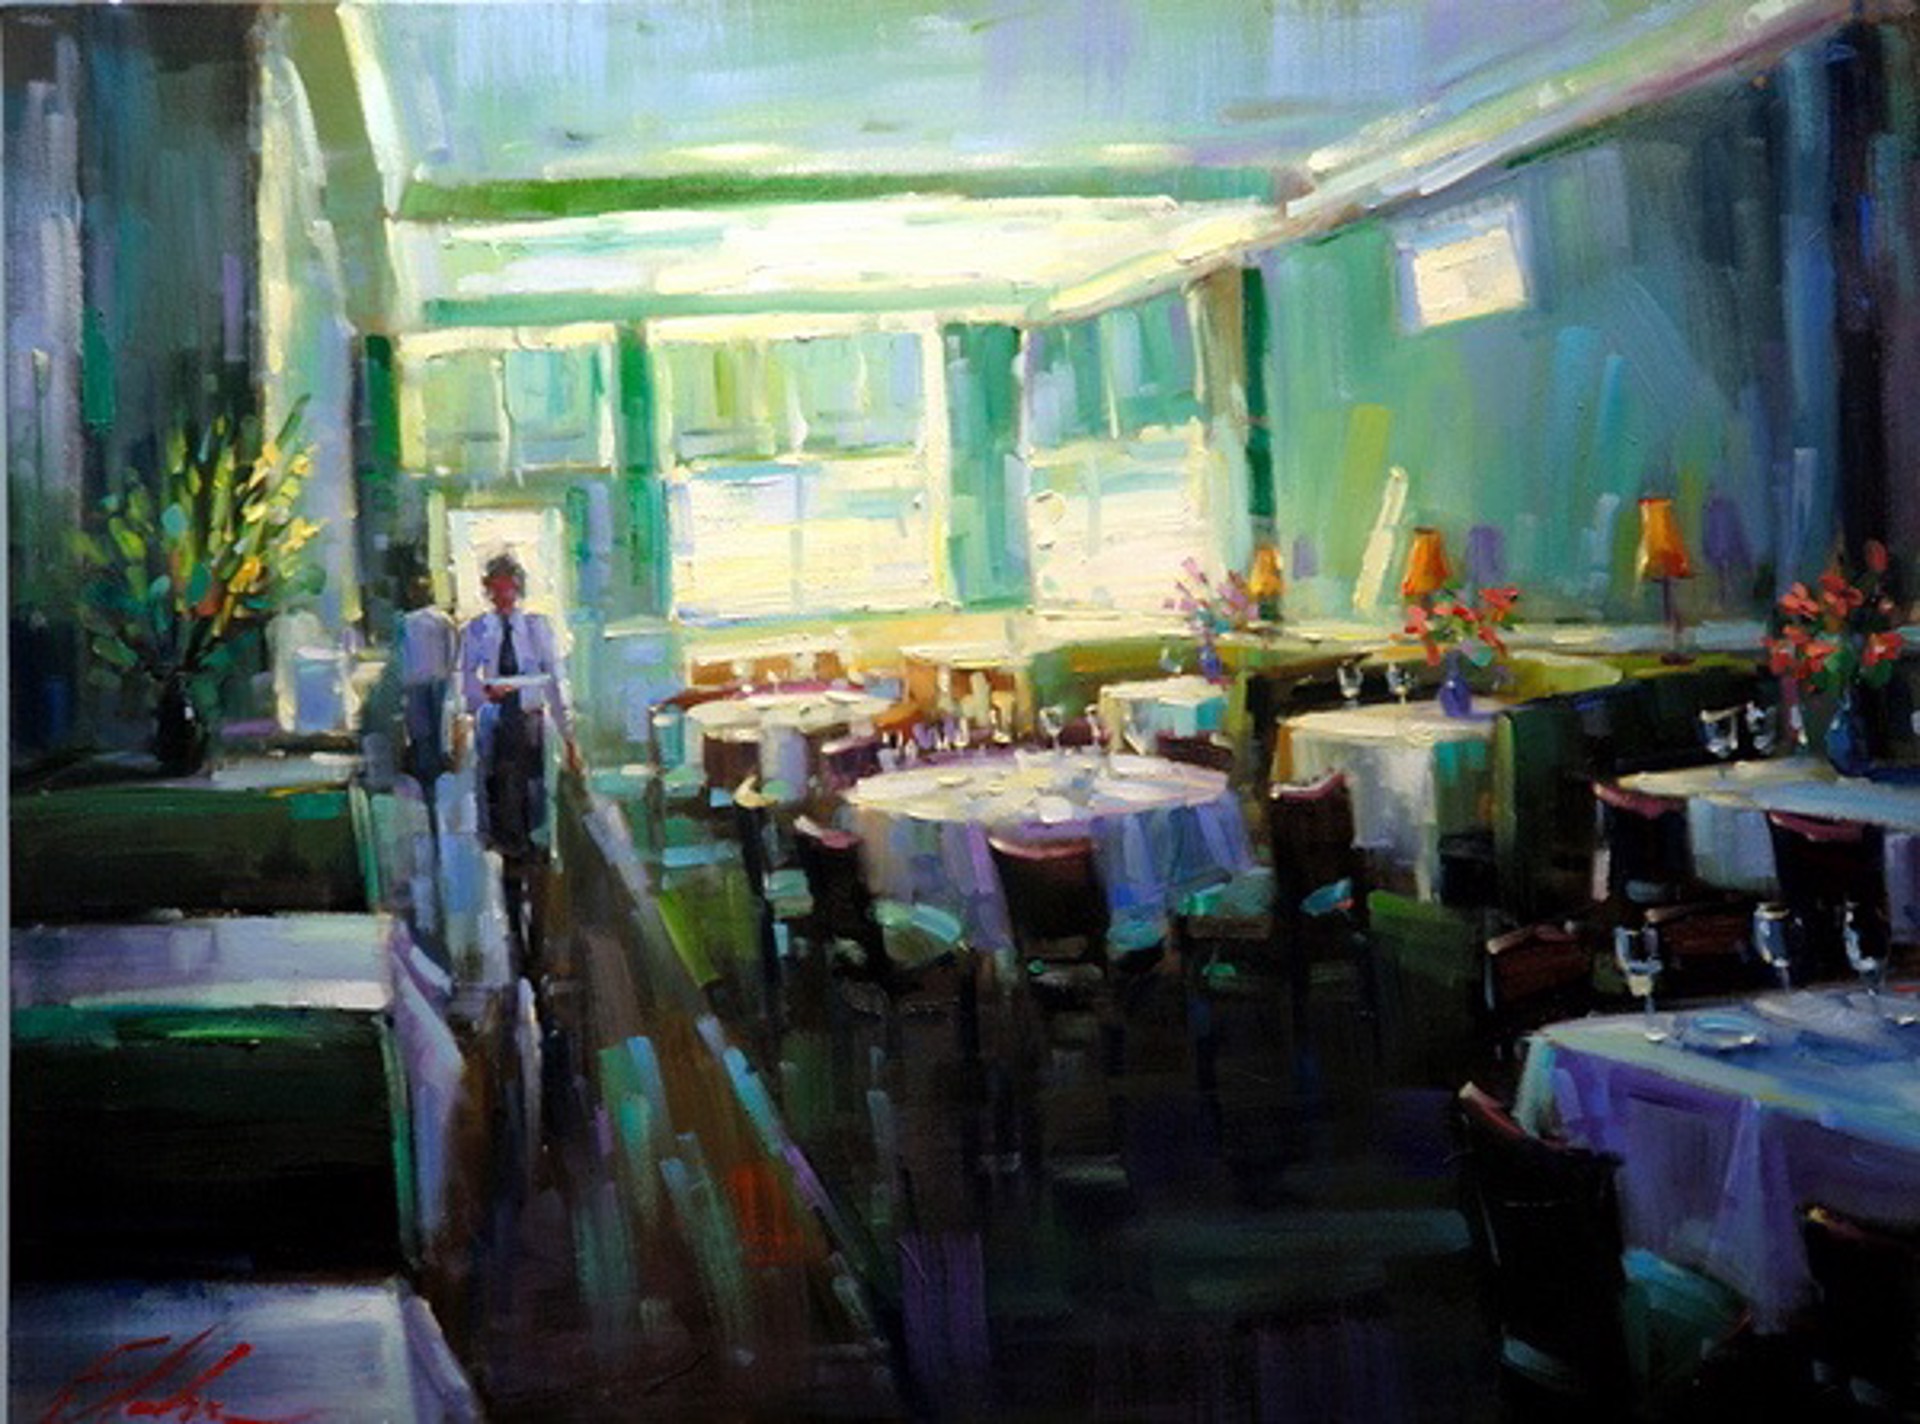 Set To Perfection by Michael Flohr